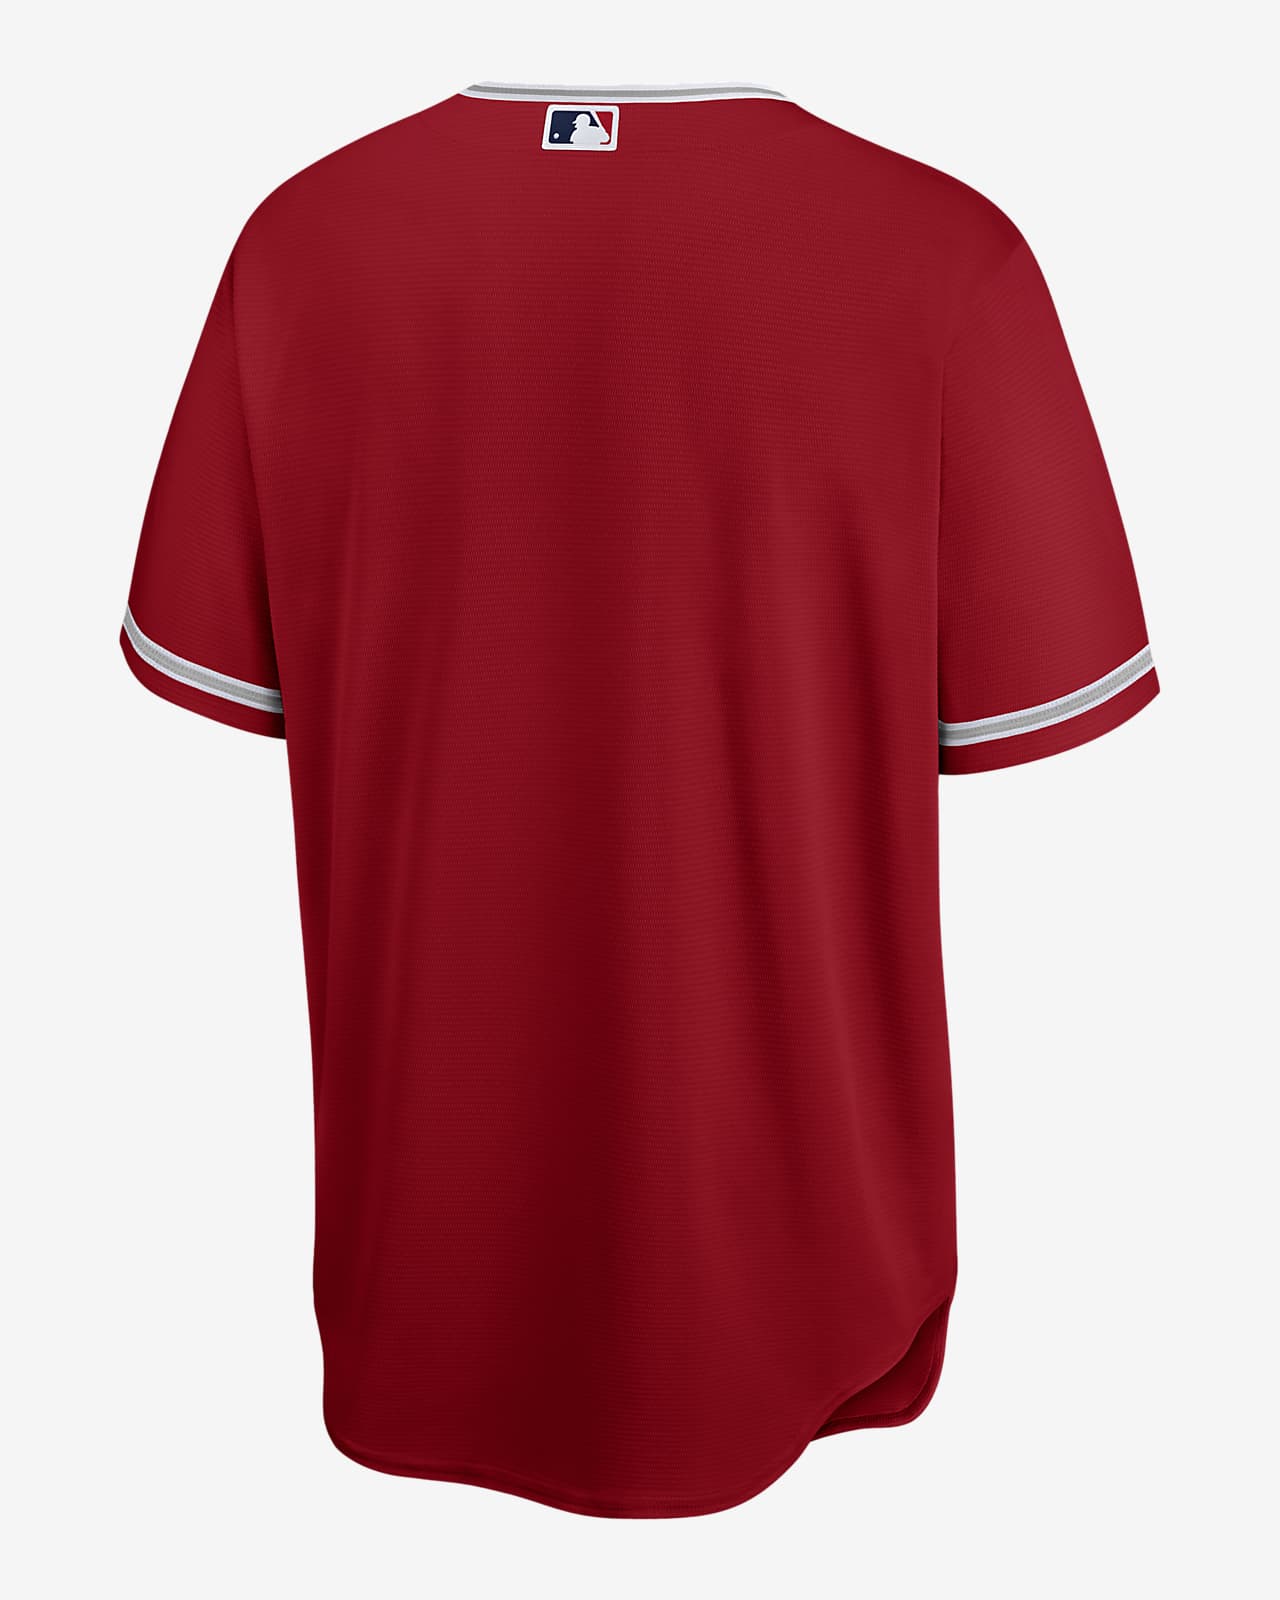 https://static.nike.com/a/images/t_PDP_1280_v1/f_auto,q_auto:eco/6b61a84a-9403-43f8-8b56-85f0ca9424f5/camiseta-de-b%C3%A9isbol-replica-mlb-los-angeles-angels-hL4zZ7.png